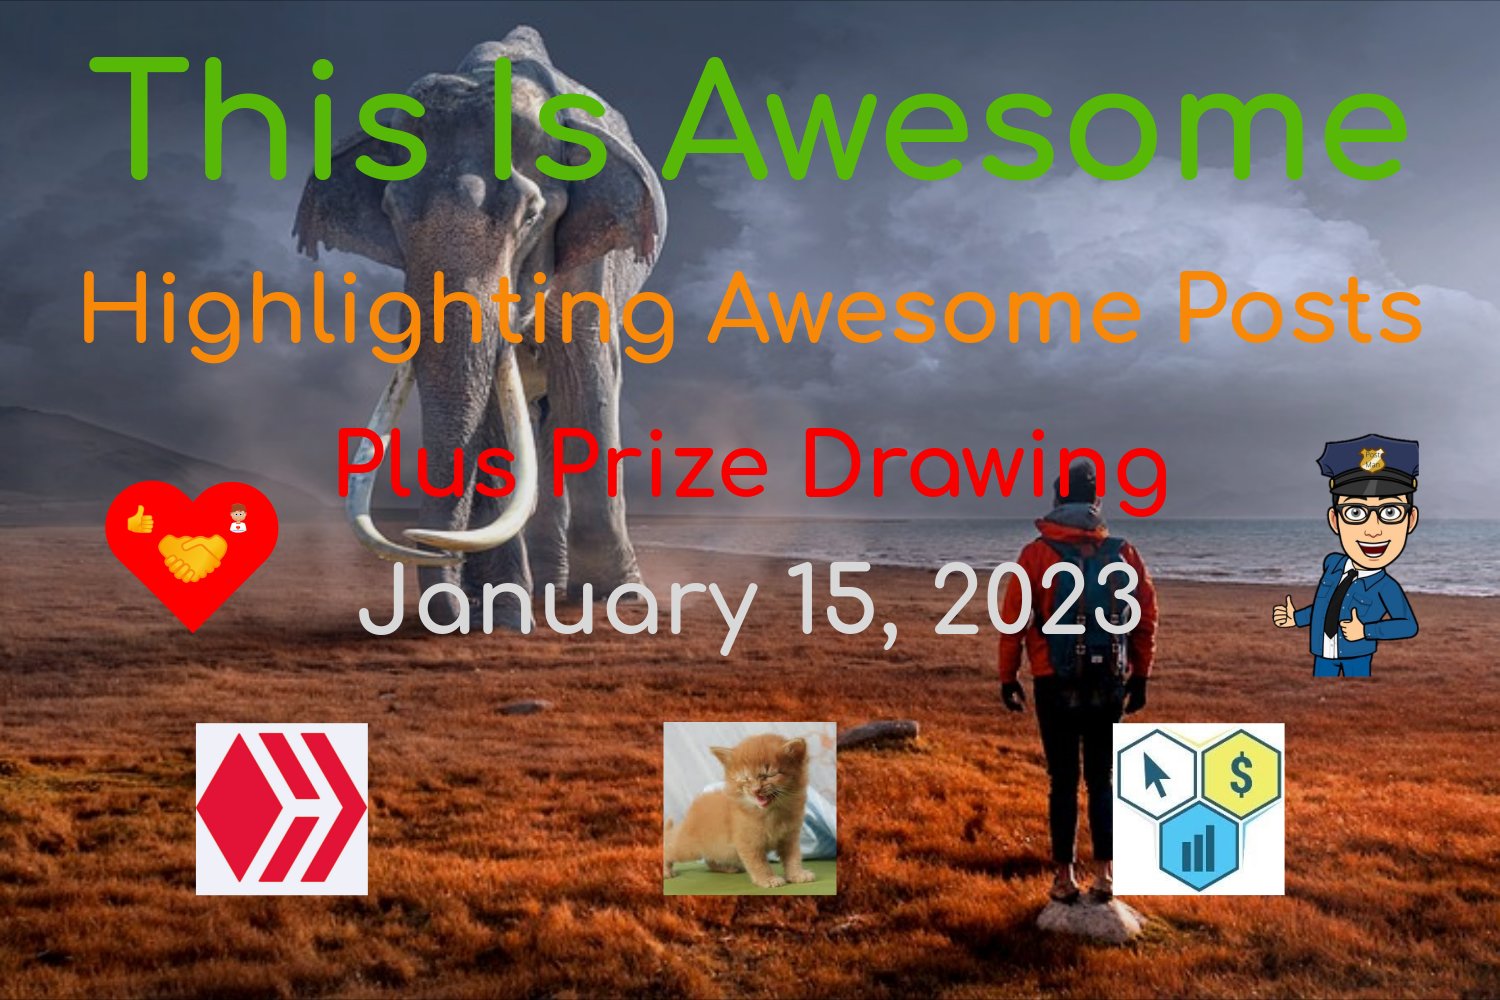 @thisisawesome/this-is-awesome-highlighting-awesome-posts-plus-prize-drawing-january-15-2023